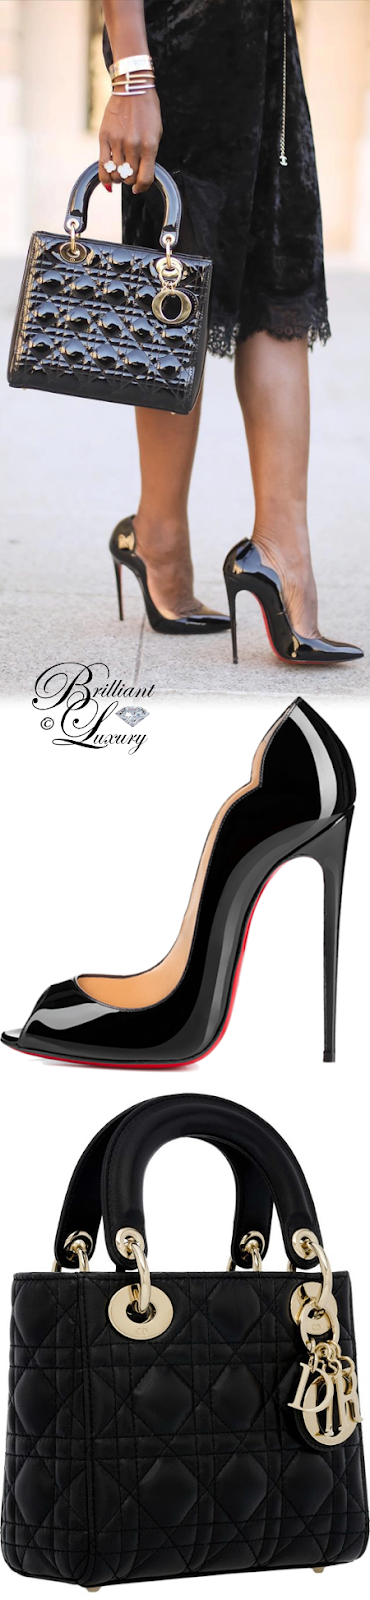 Brilliant Luxury ♦ Lady Dior bag and Christian Louboutin New Wave pumps #streetstyle #black